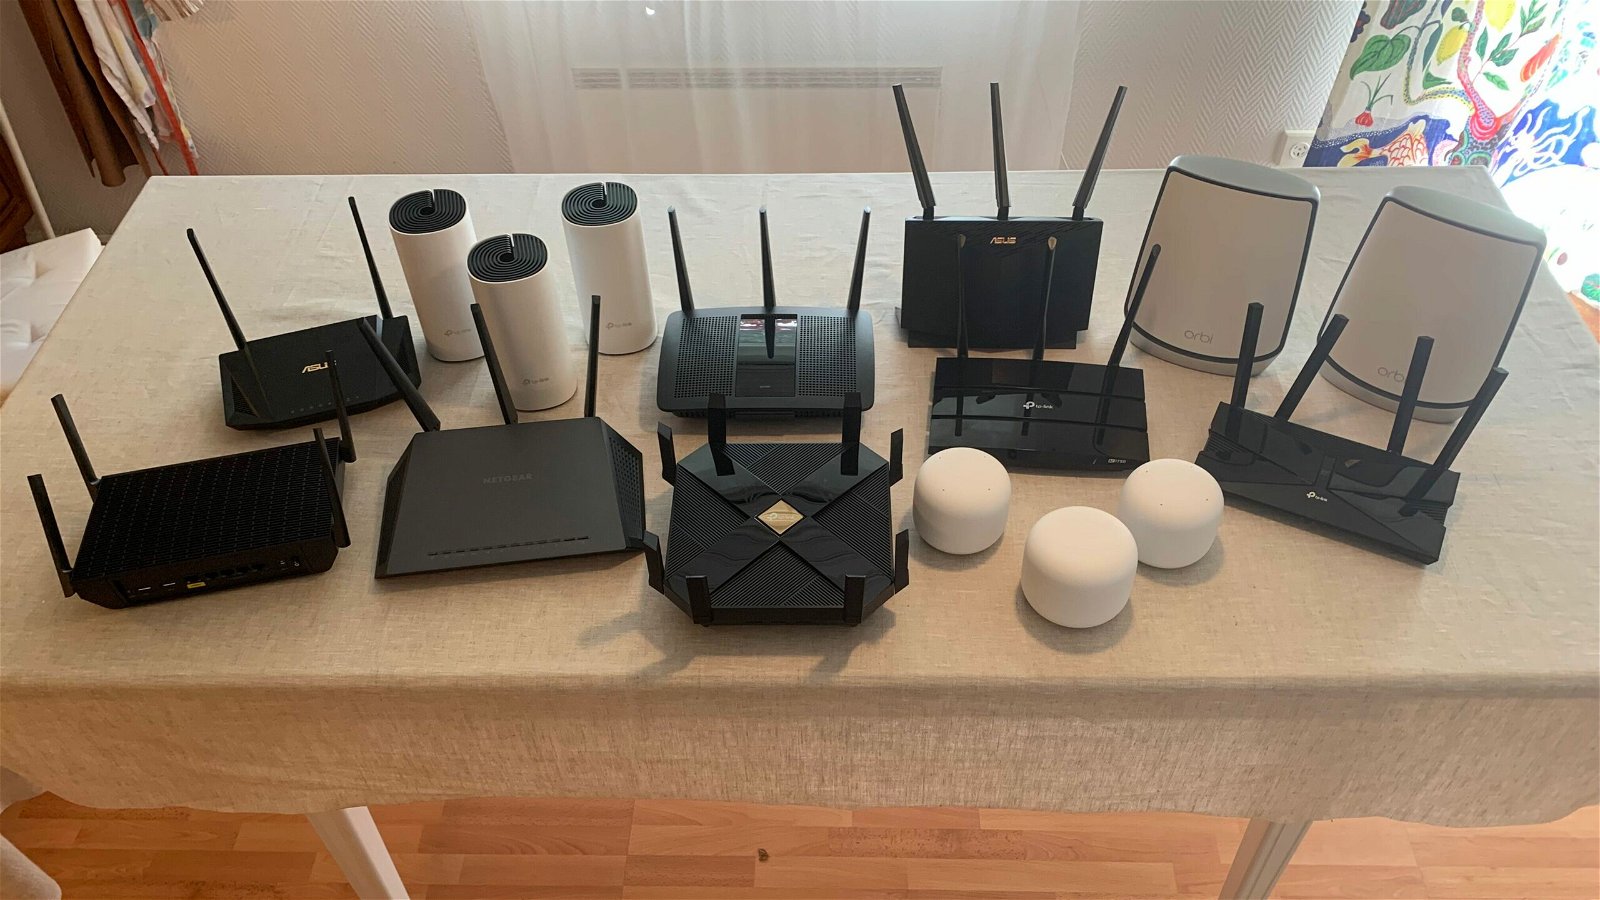 Some of the routers we have tested